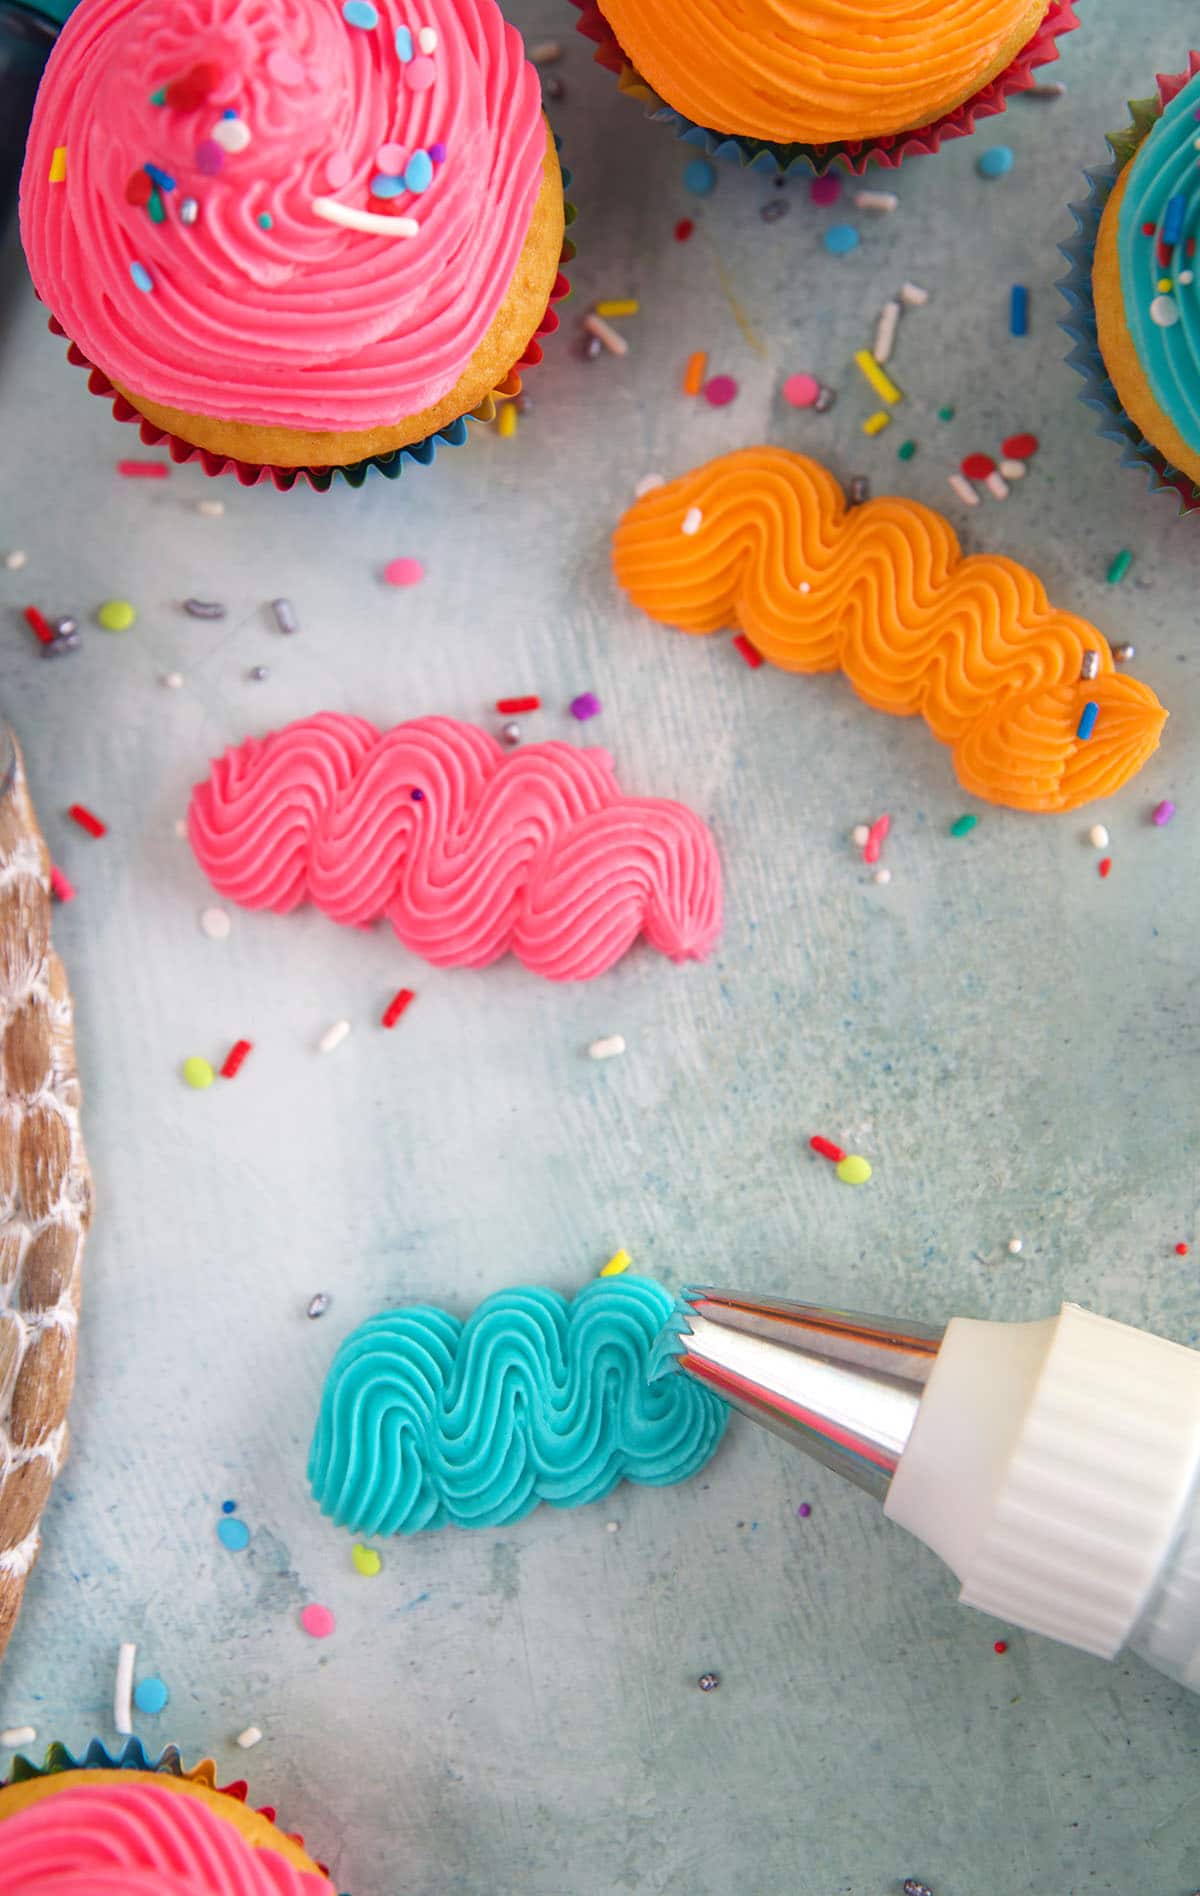 Squiggles of frosting are piped onto a parchment paper.